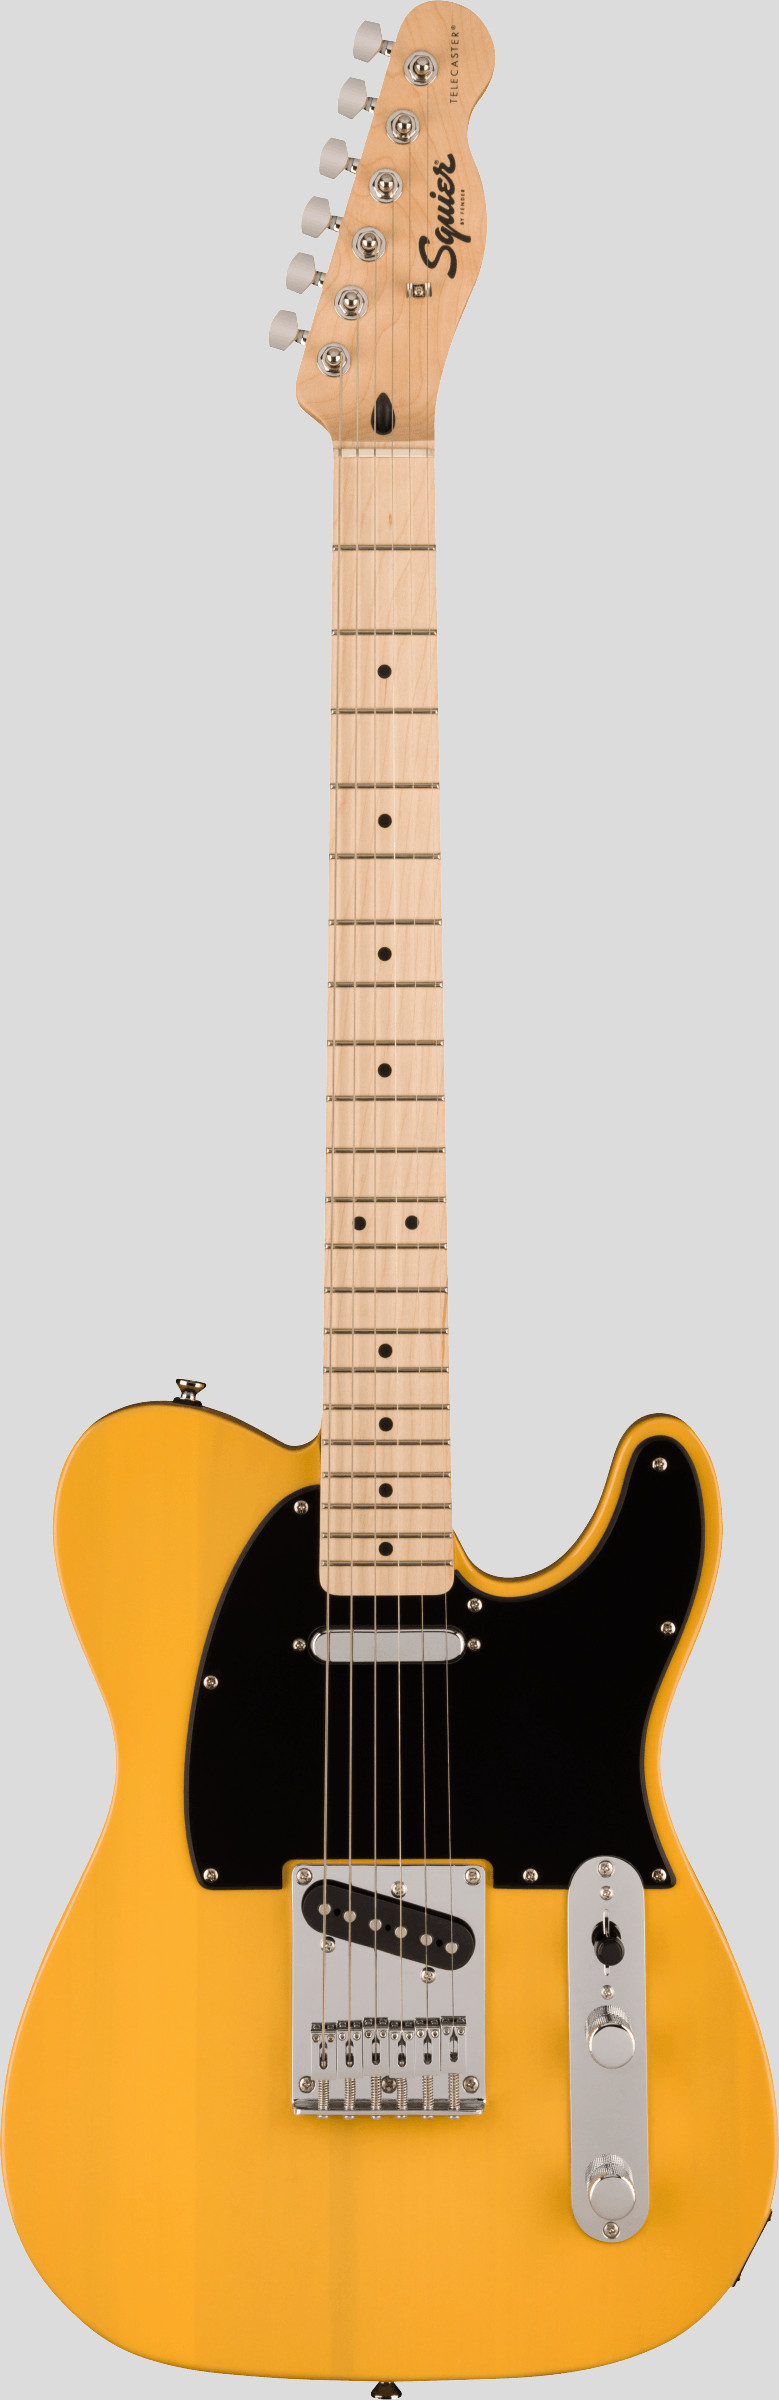 Squier by Fender Sonic Telecaster Butterscotch Blonde 1